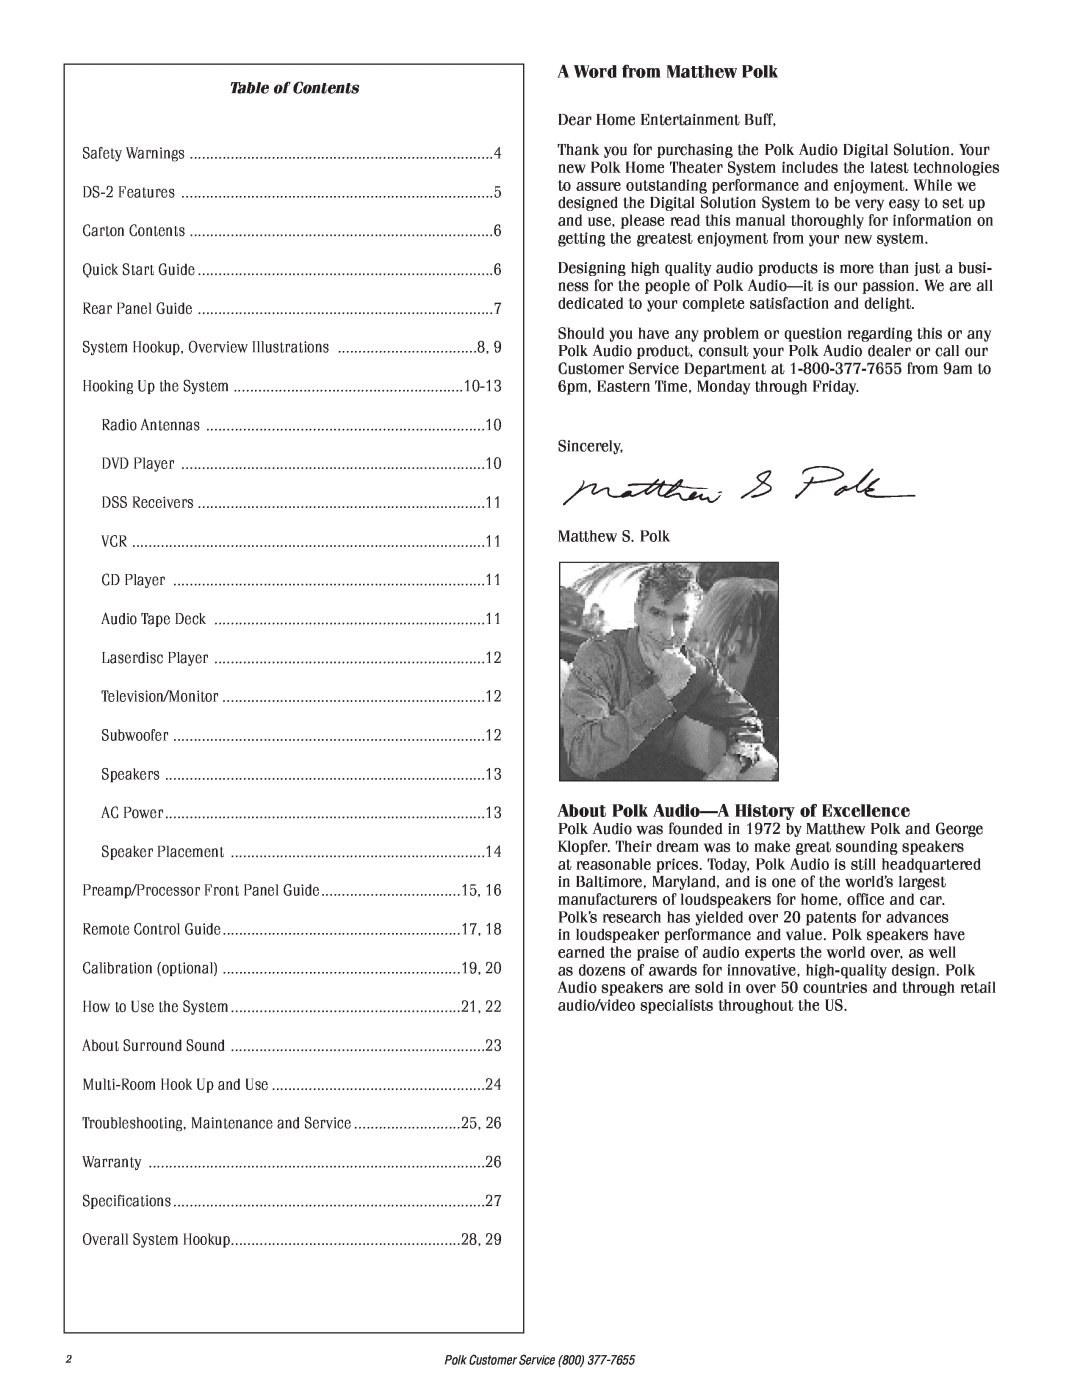 Polk Audio 2 instruction manual A Word from Matthew Polk, About Polk Audio-AHistory of Excellence, Table of Contents 